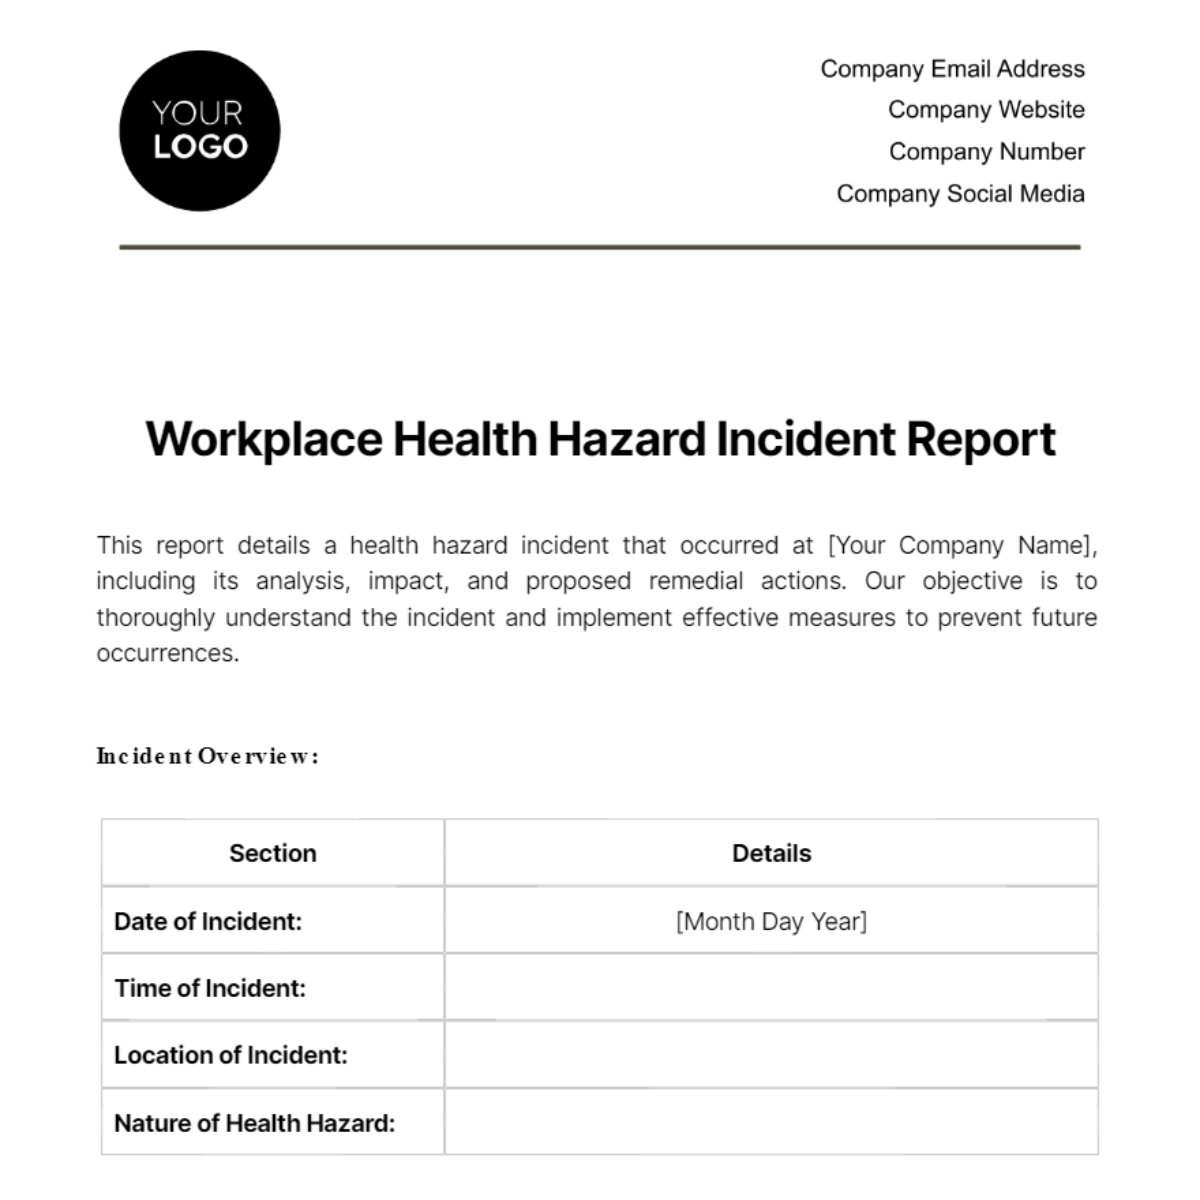 Free Workplace Health Hazard Incident Report Template